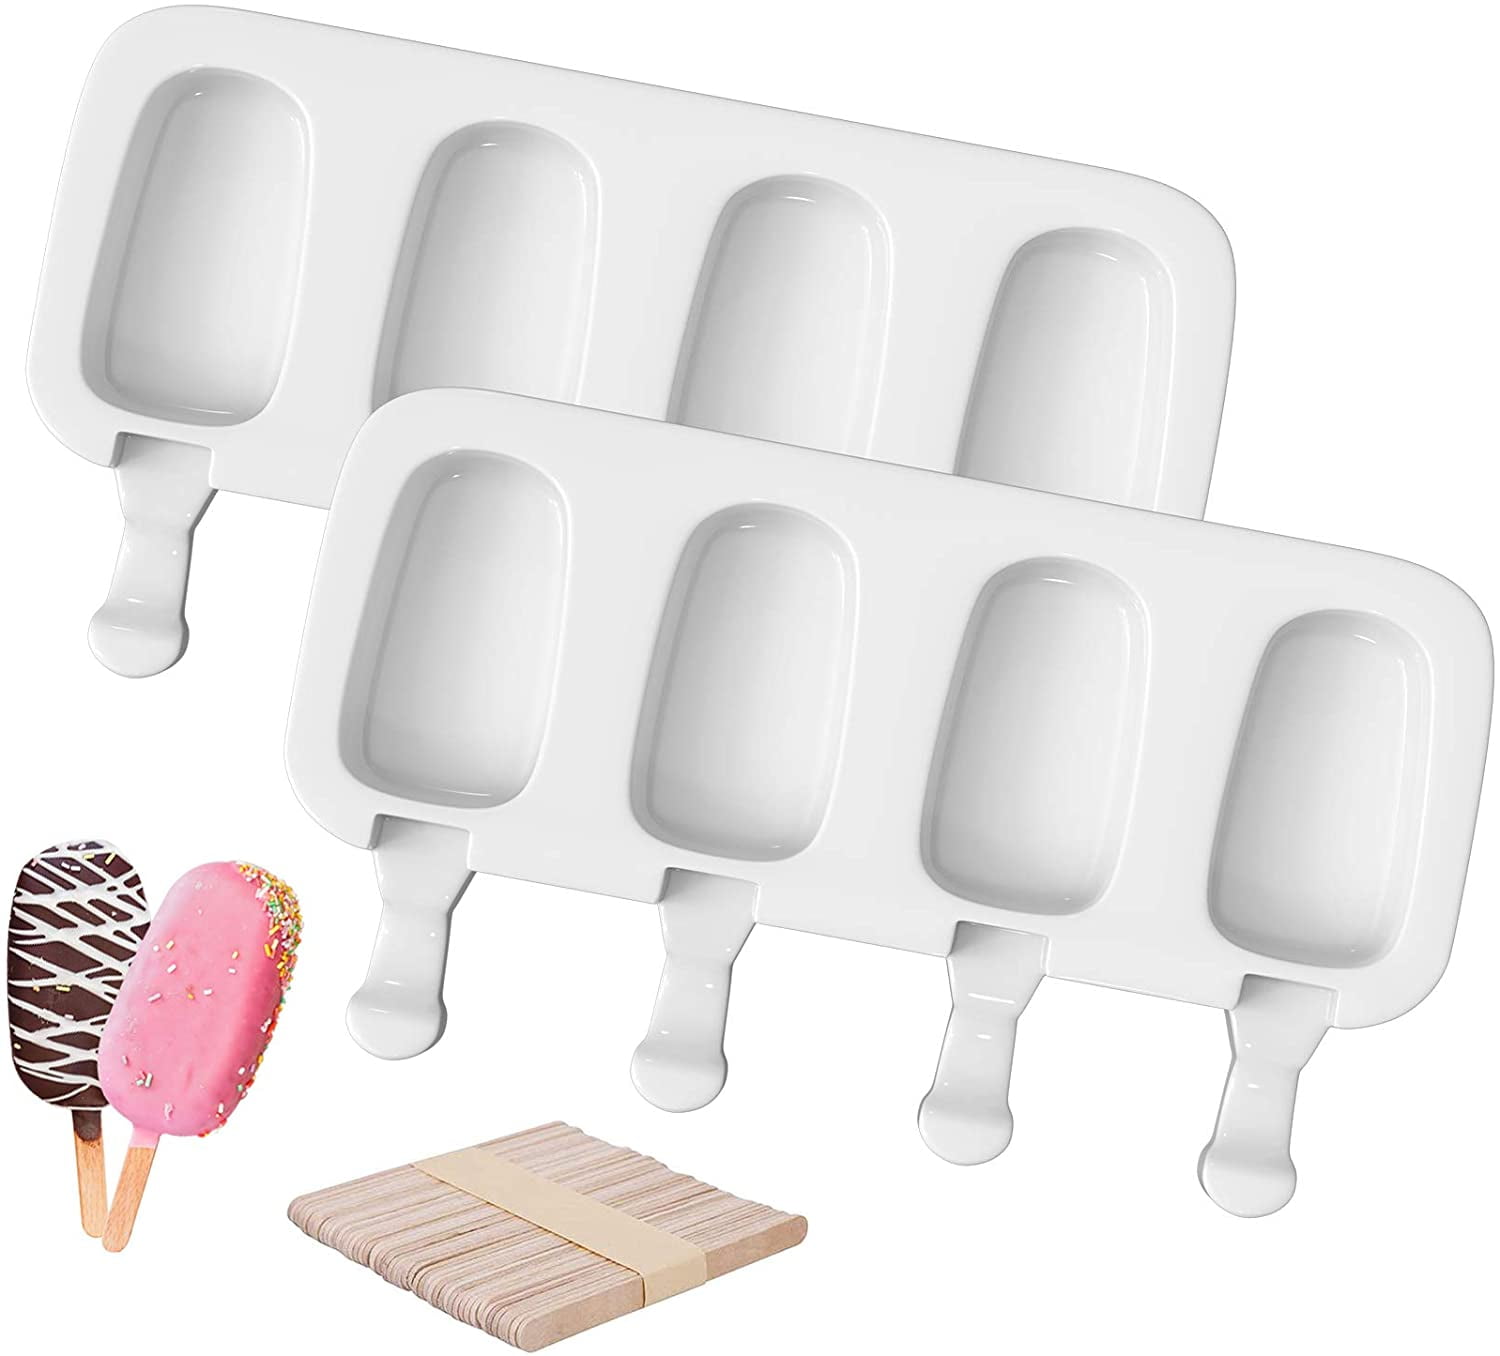 Ozera 2 Pack Popsicles Molds, Homemade Cake Pop Molds Cakesicle Molds  Silicone Popcical Molds, 4 Cavities Ice Pop Cream Molds Maker with 50  Wooden Sticks & 50 Popsicle Bags for DIY Popsicles - Yahoo Shopping